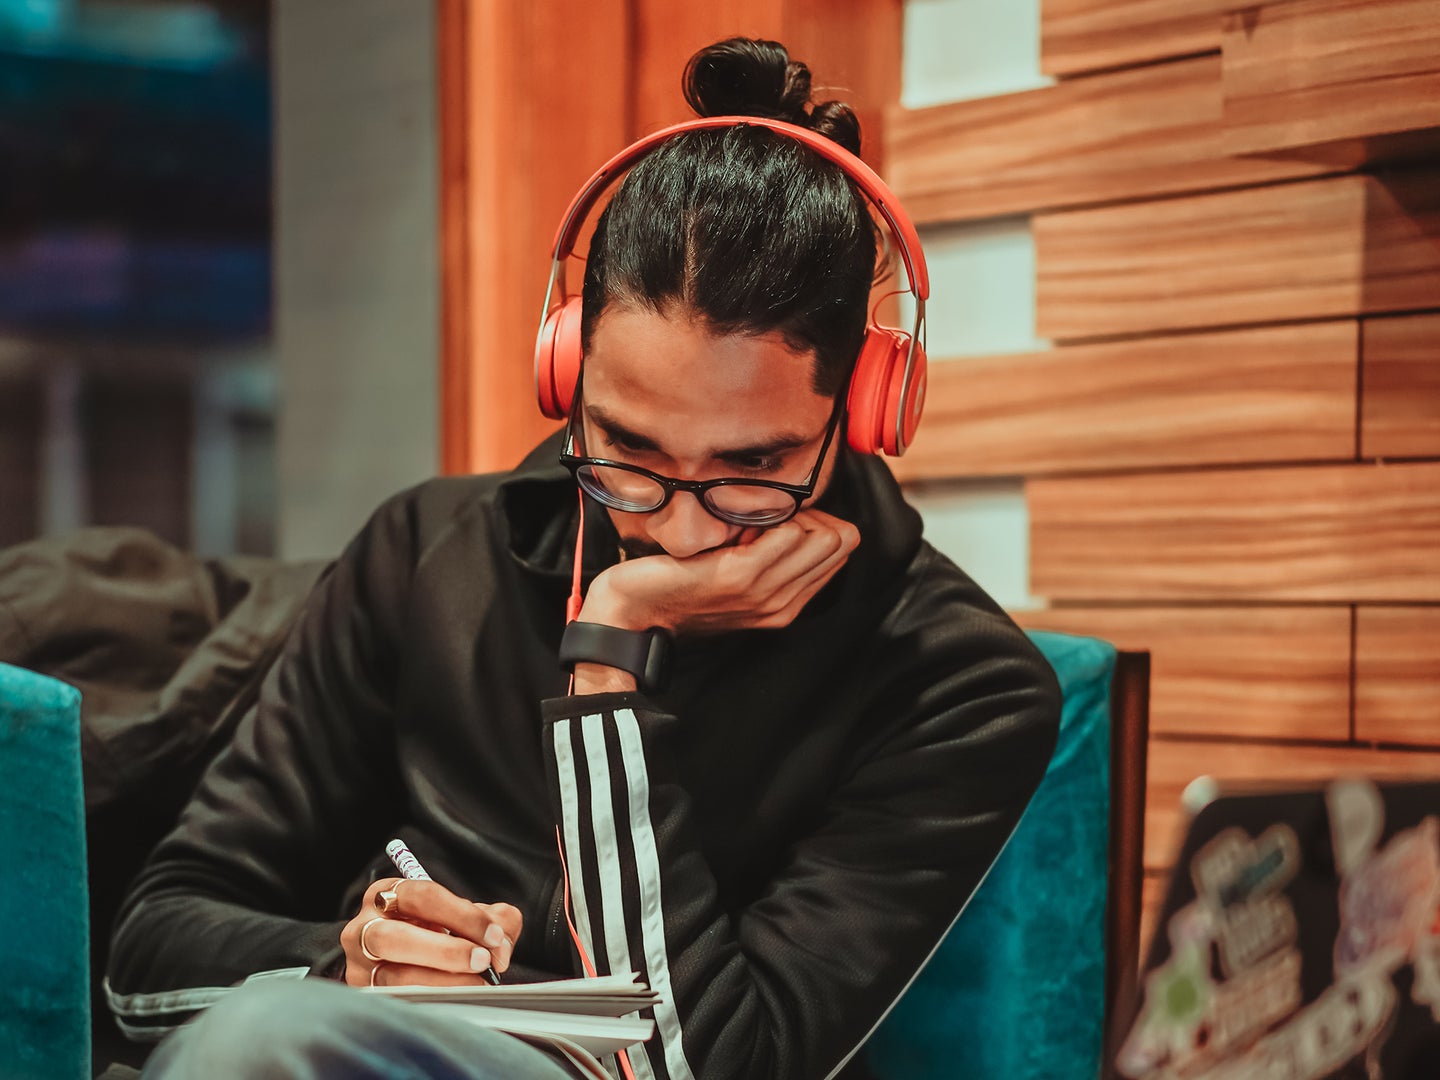 a man with headphones listening to podcasts or music